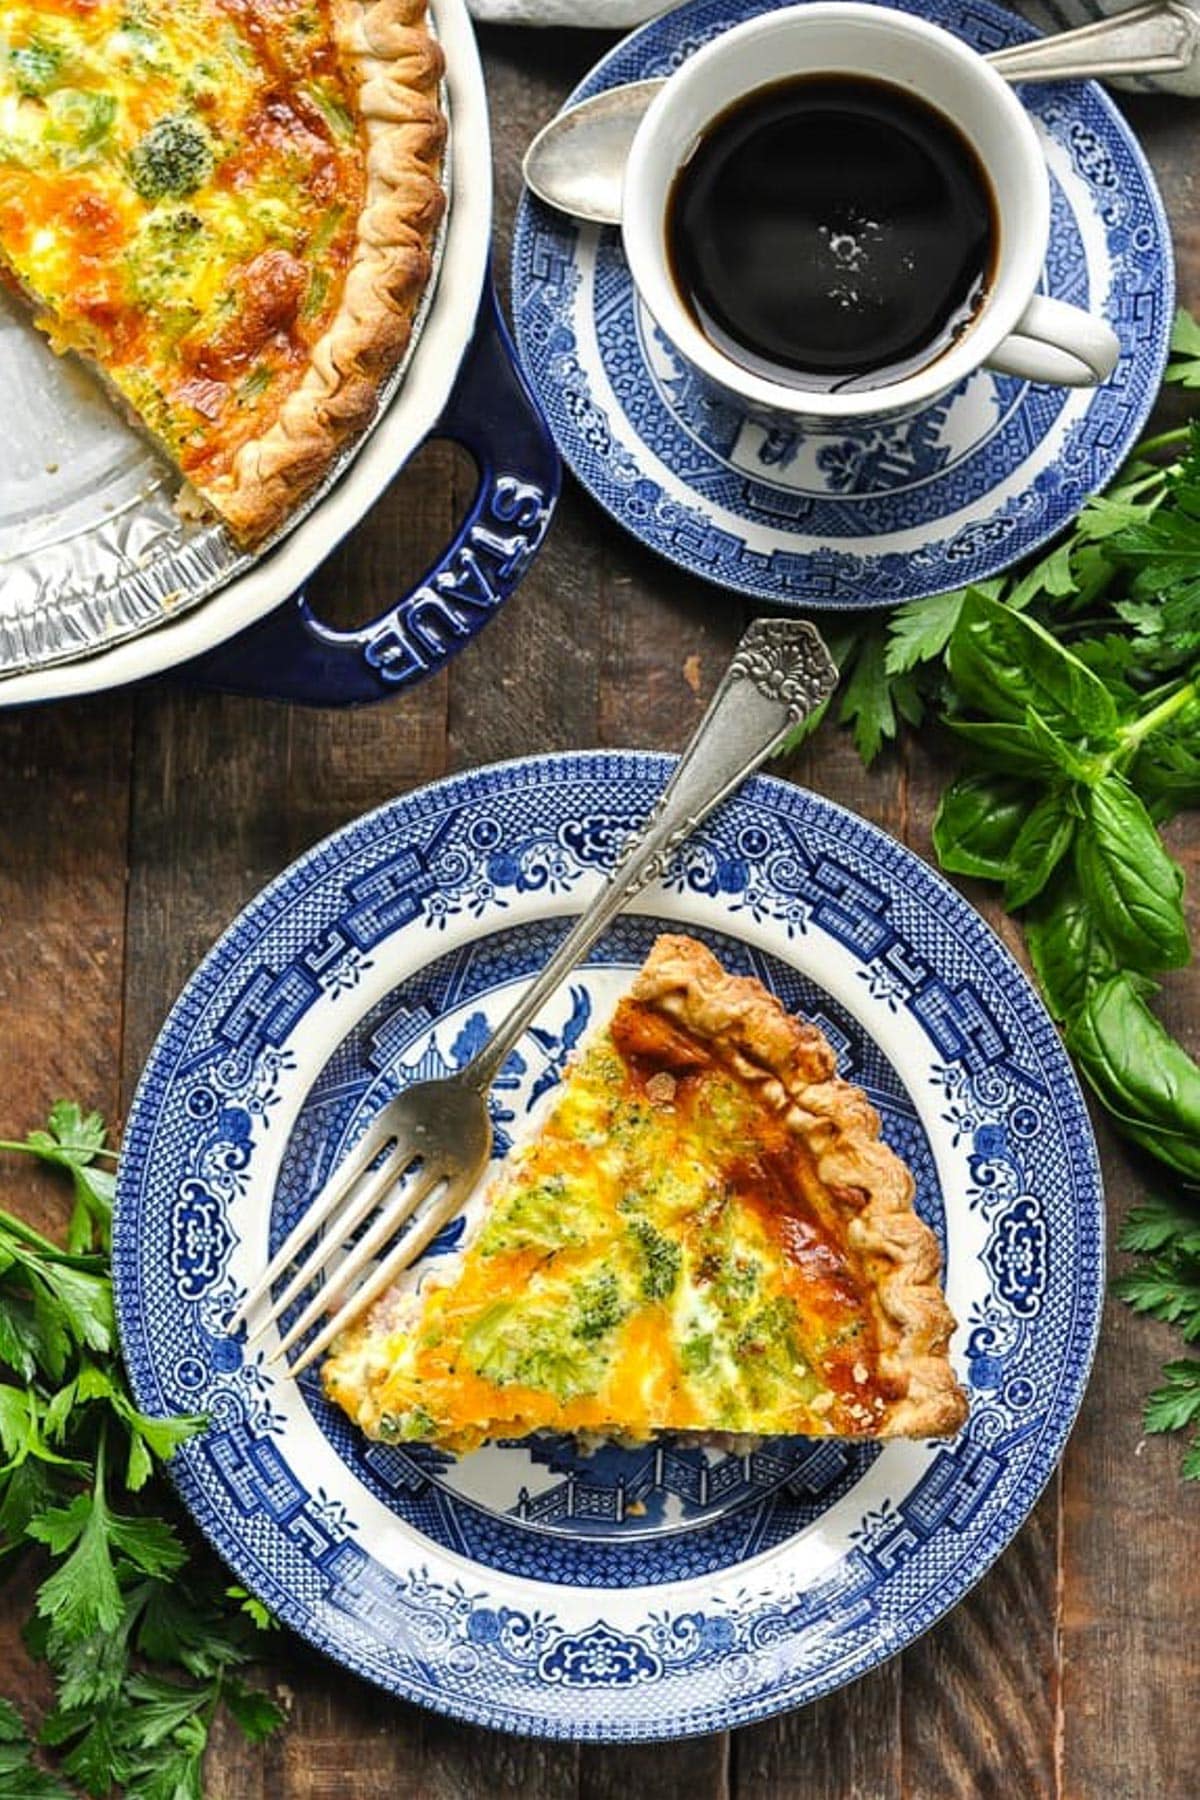 Overhead shot of a plate of ham and broccoli quiche on a wooden table with a cup of coffee.